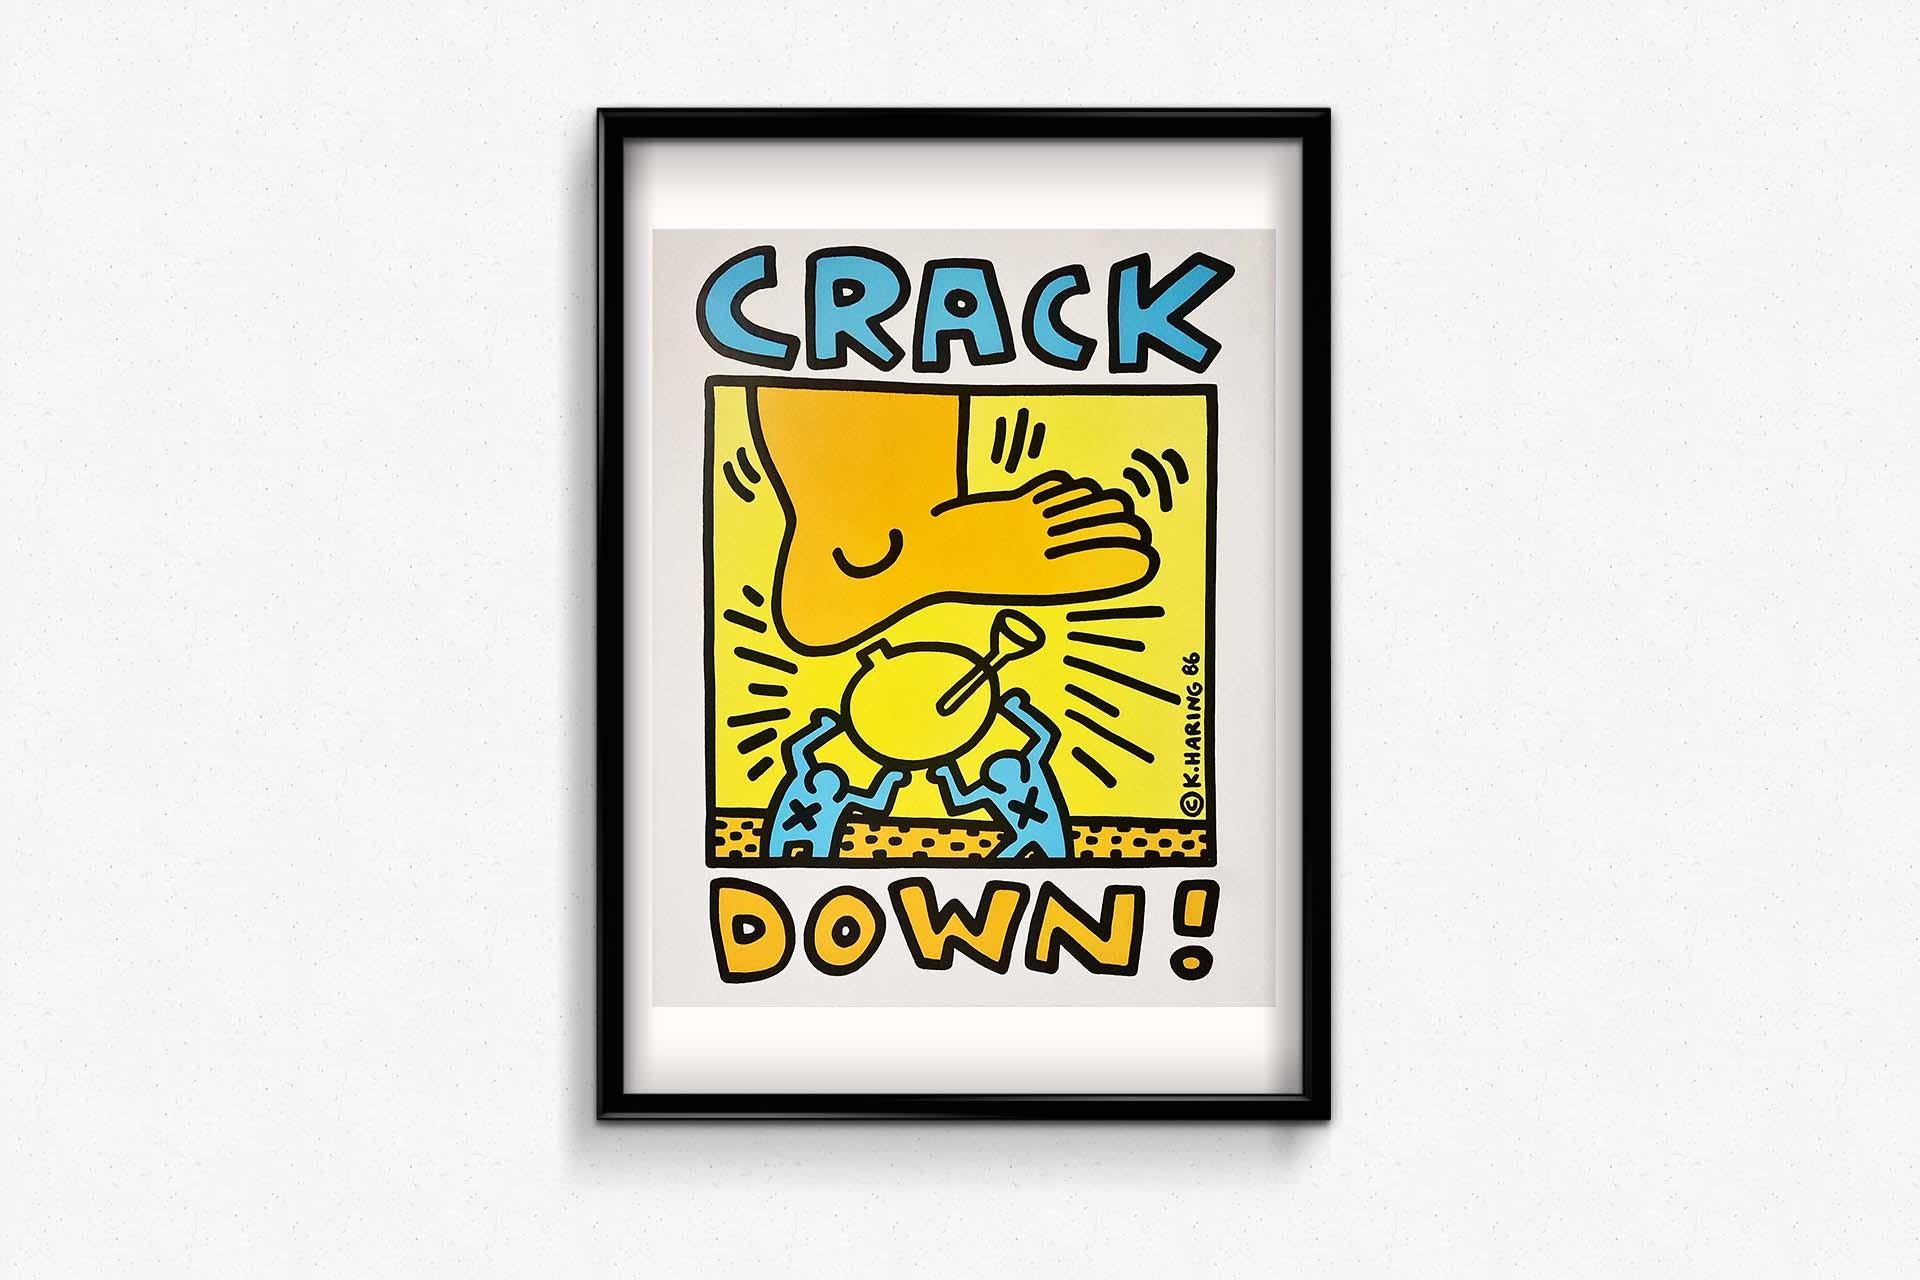 Keith Haring's original poster for 